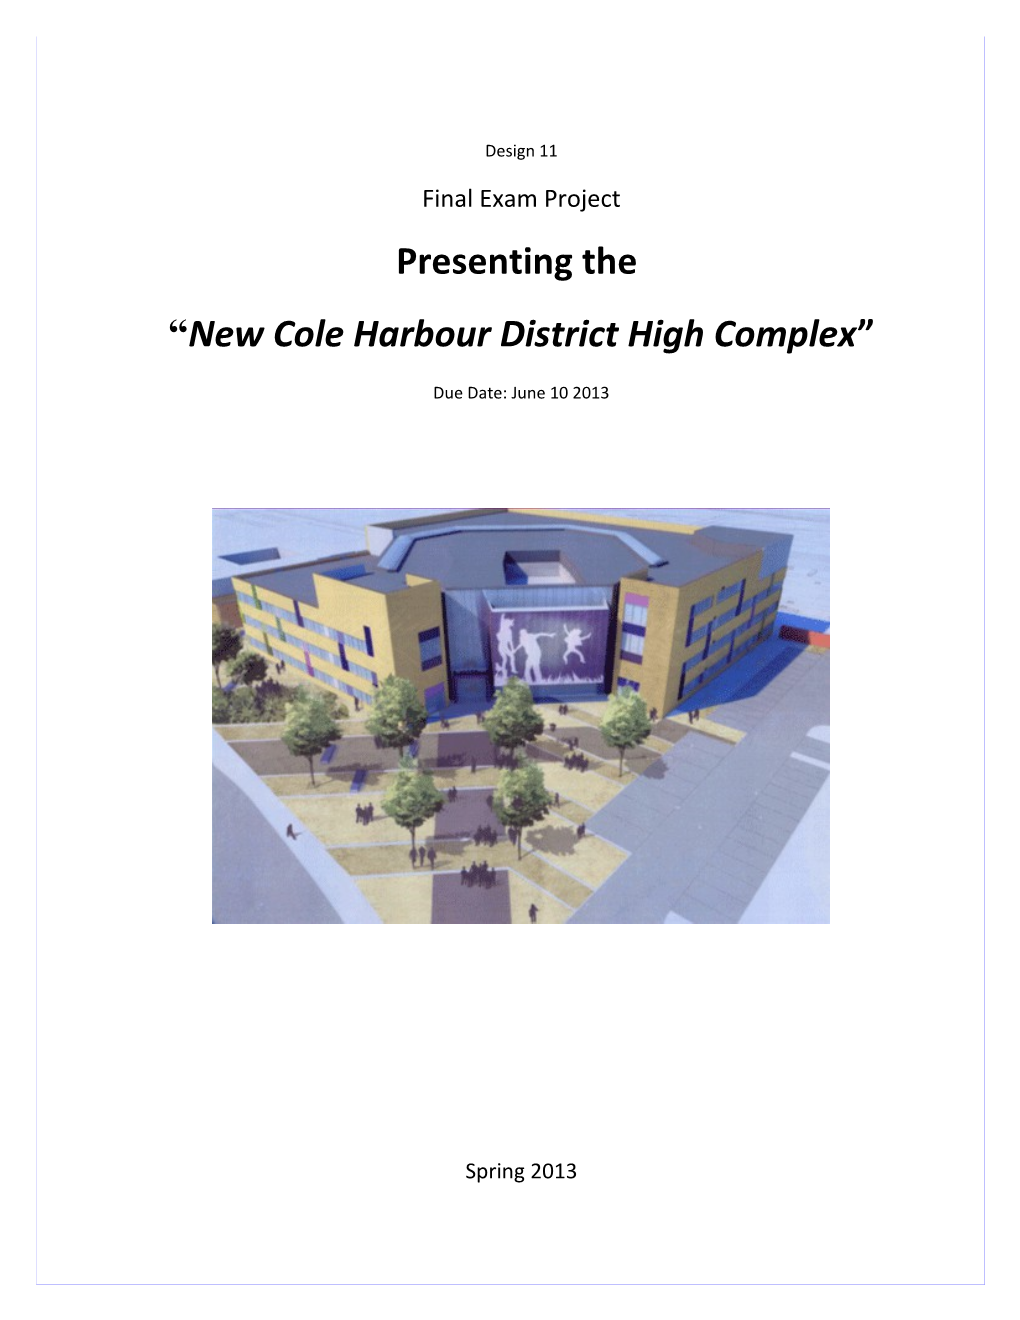 Final Exam Design Project Designing the New Cole Harbour District High